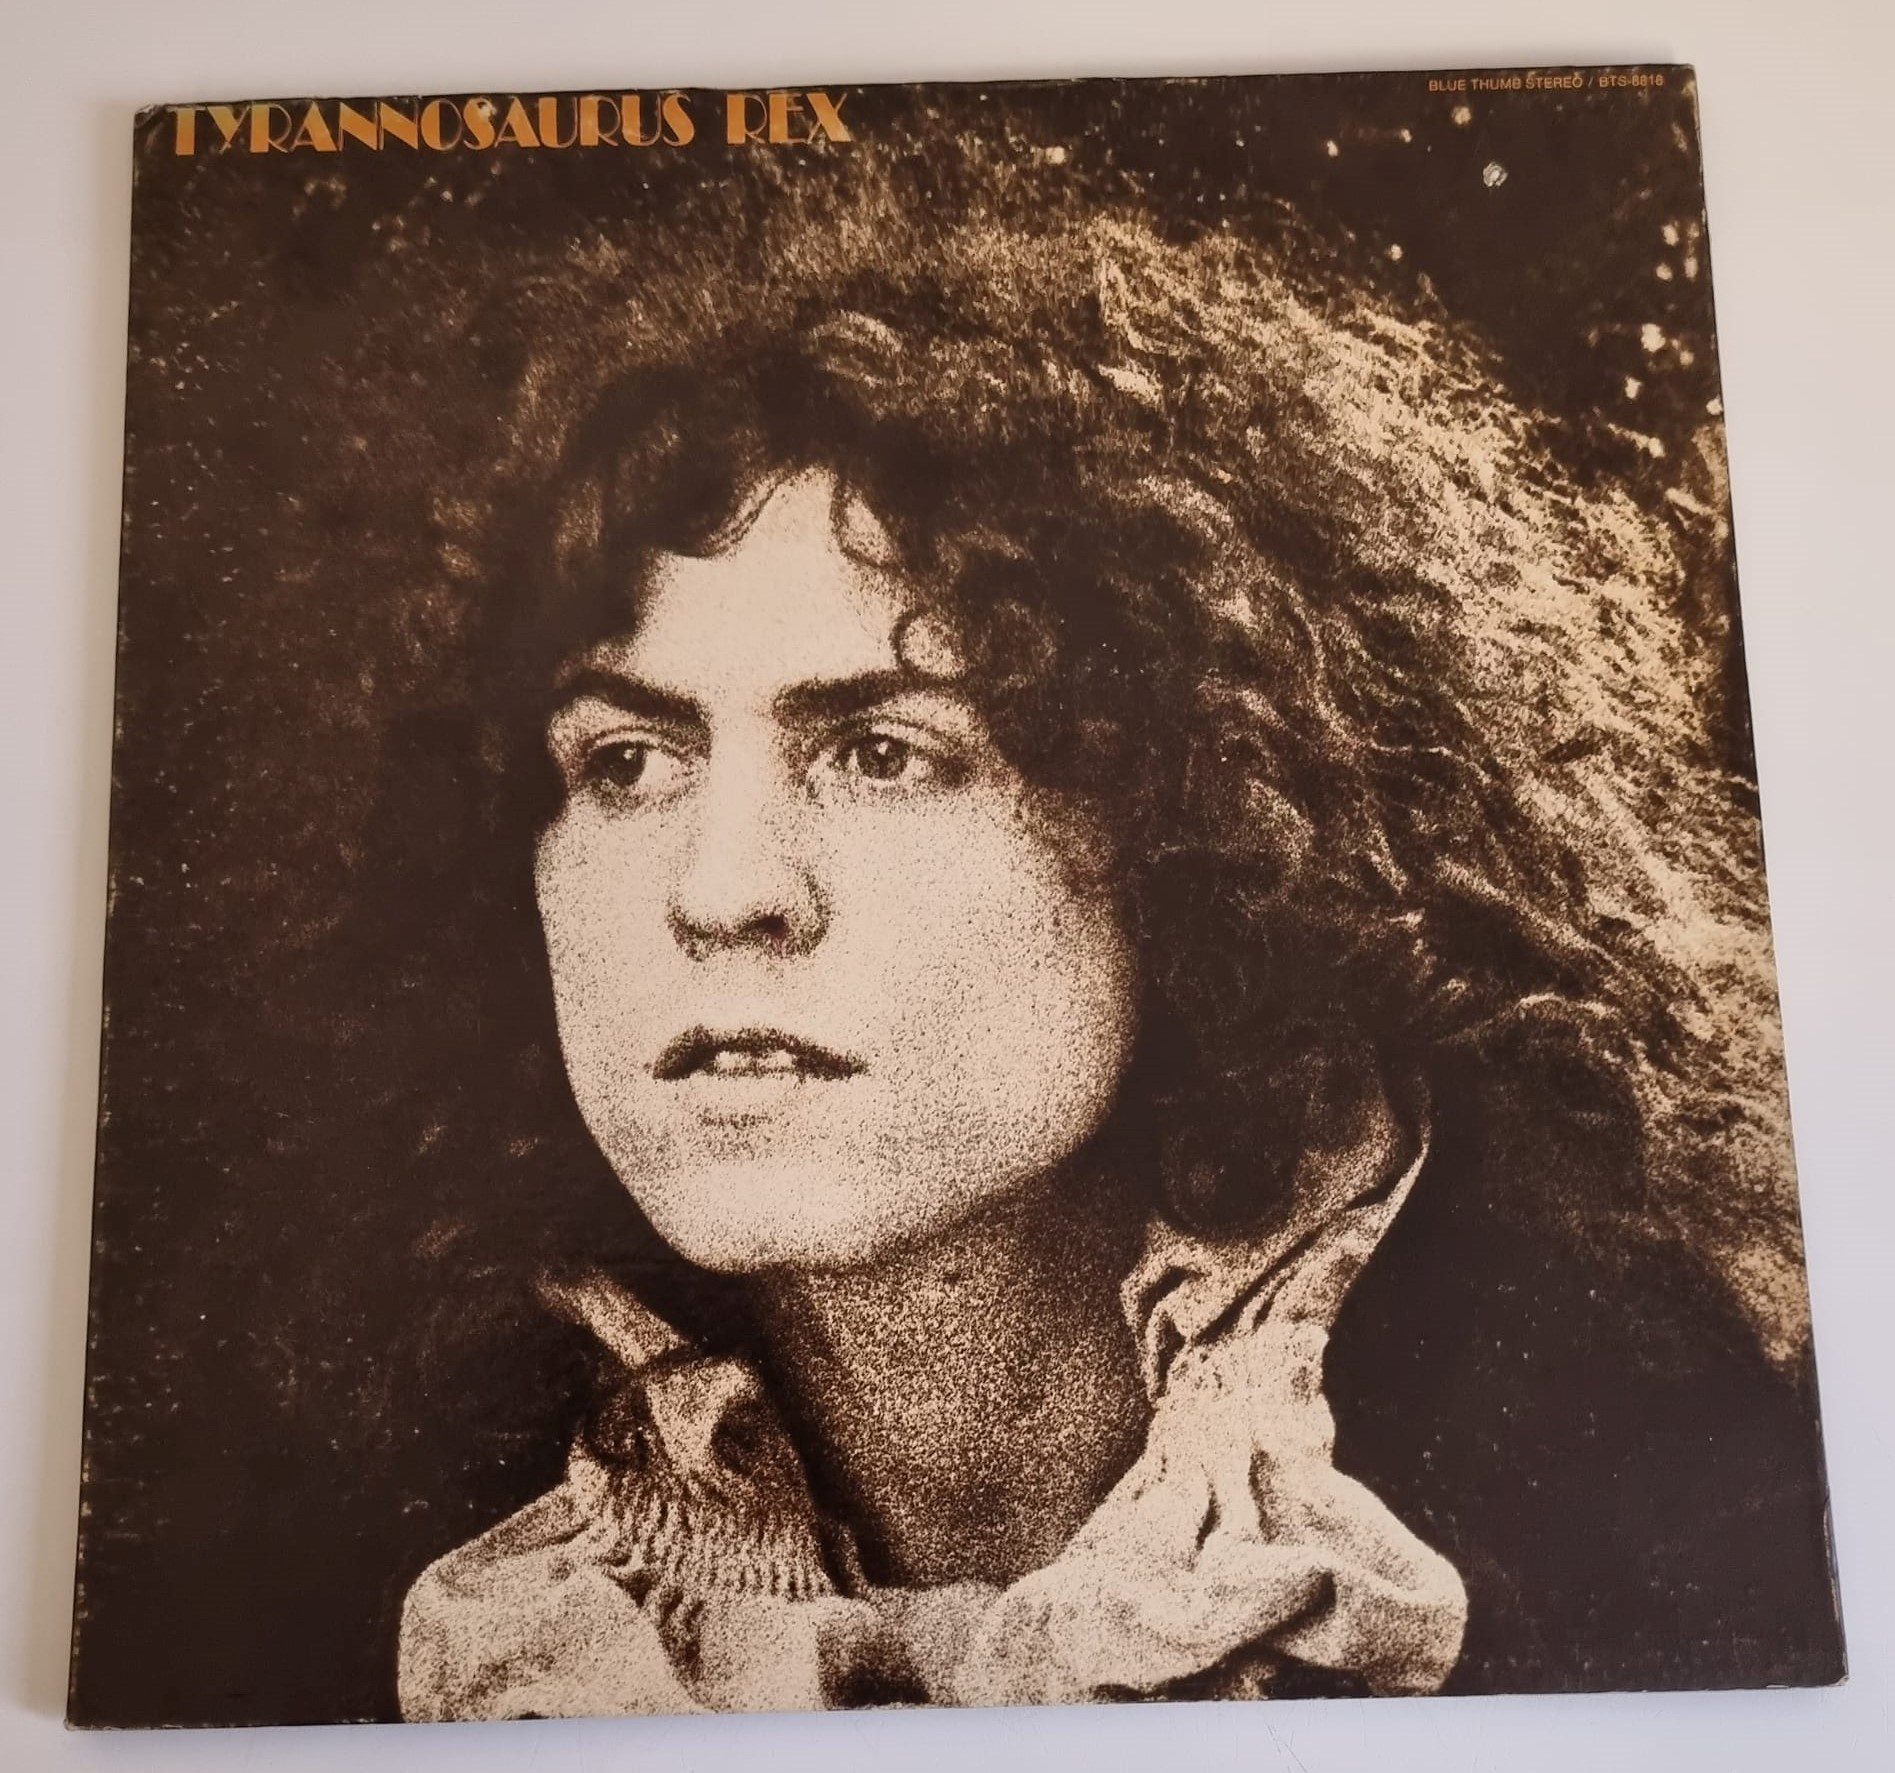 Buy this rare Tyrannosaurus Rex record by clicking here